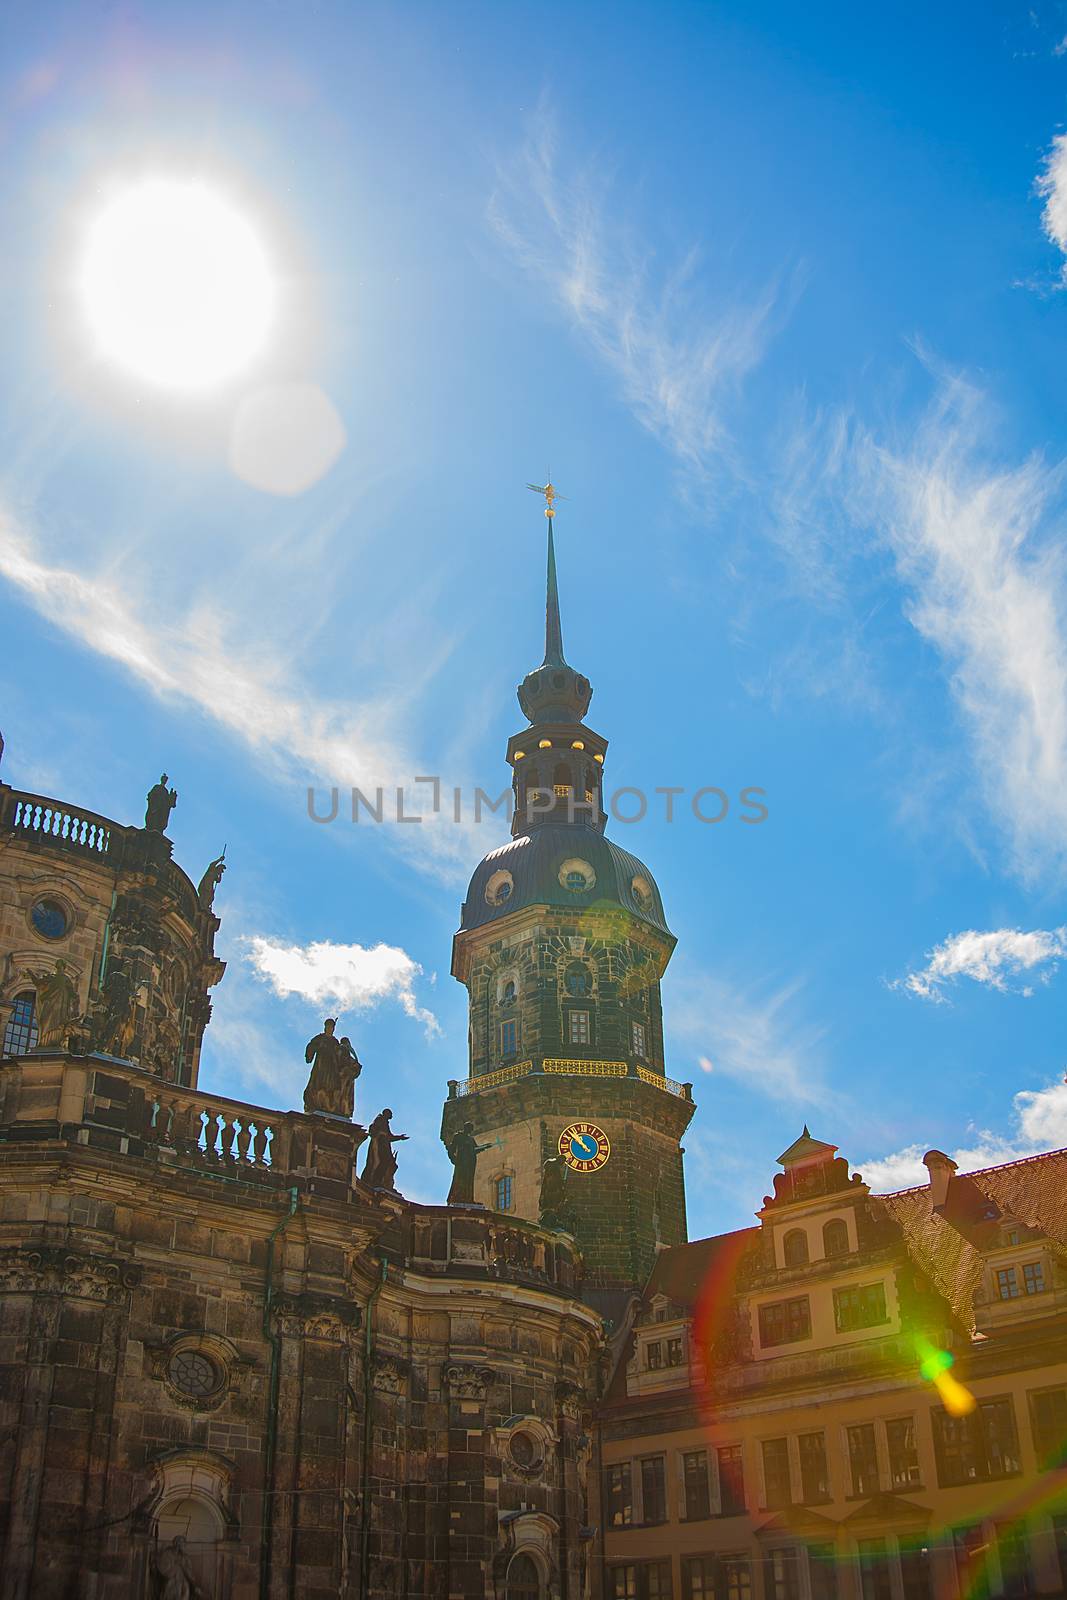 Church Frauenkirche area in Dresden Germany on a sunny day with blue